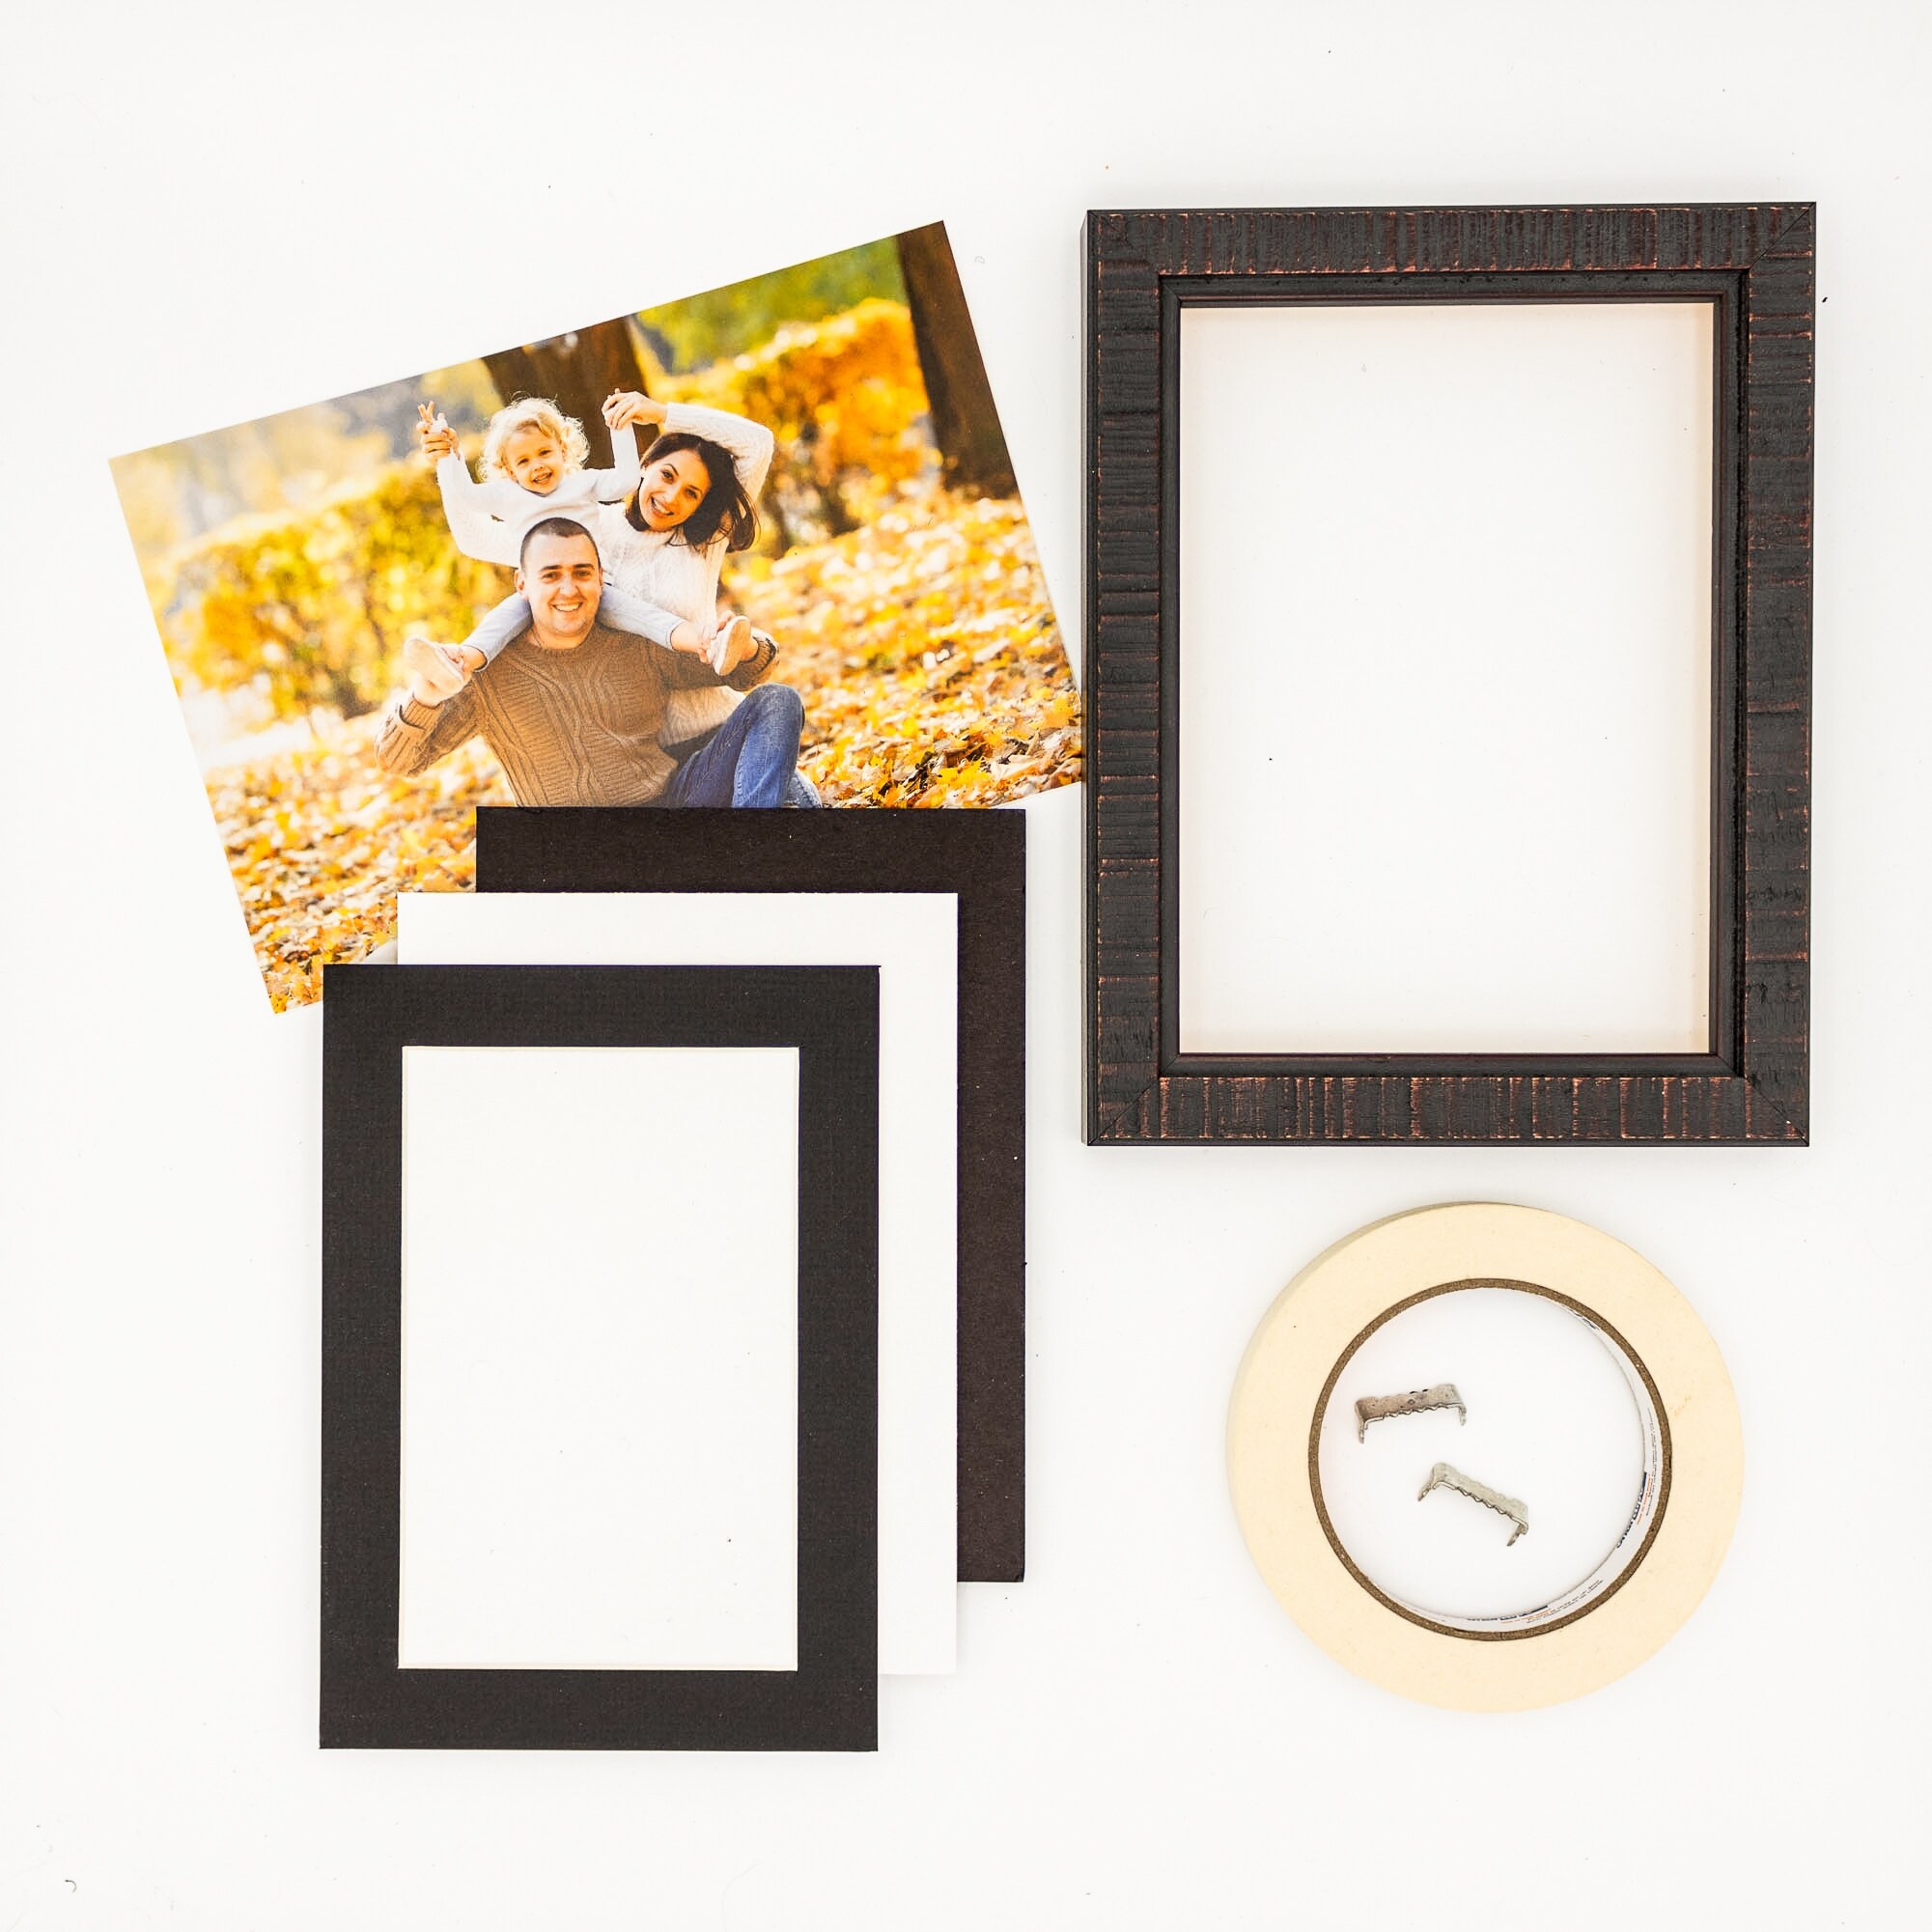 10x20 Mat Board 10 X 20 Picture Frame Matboard for Any Size Photo